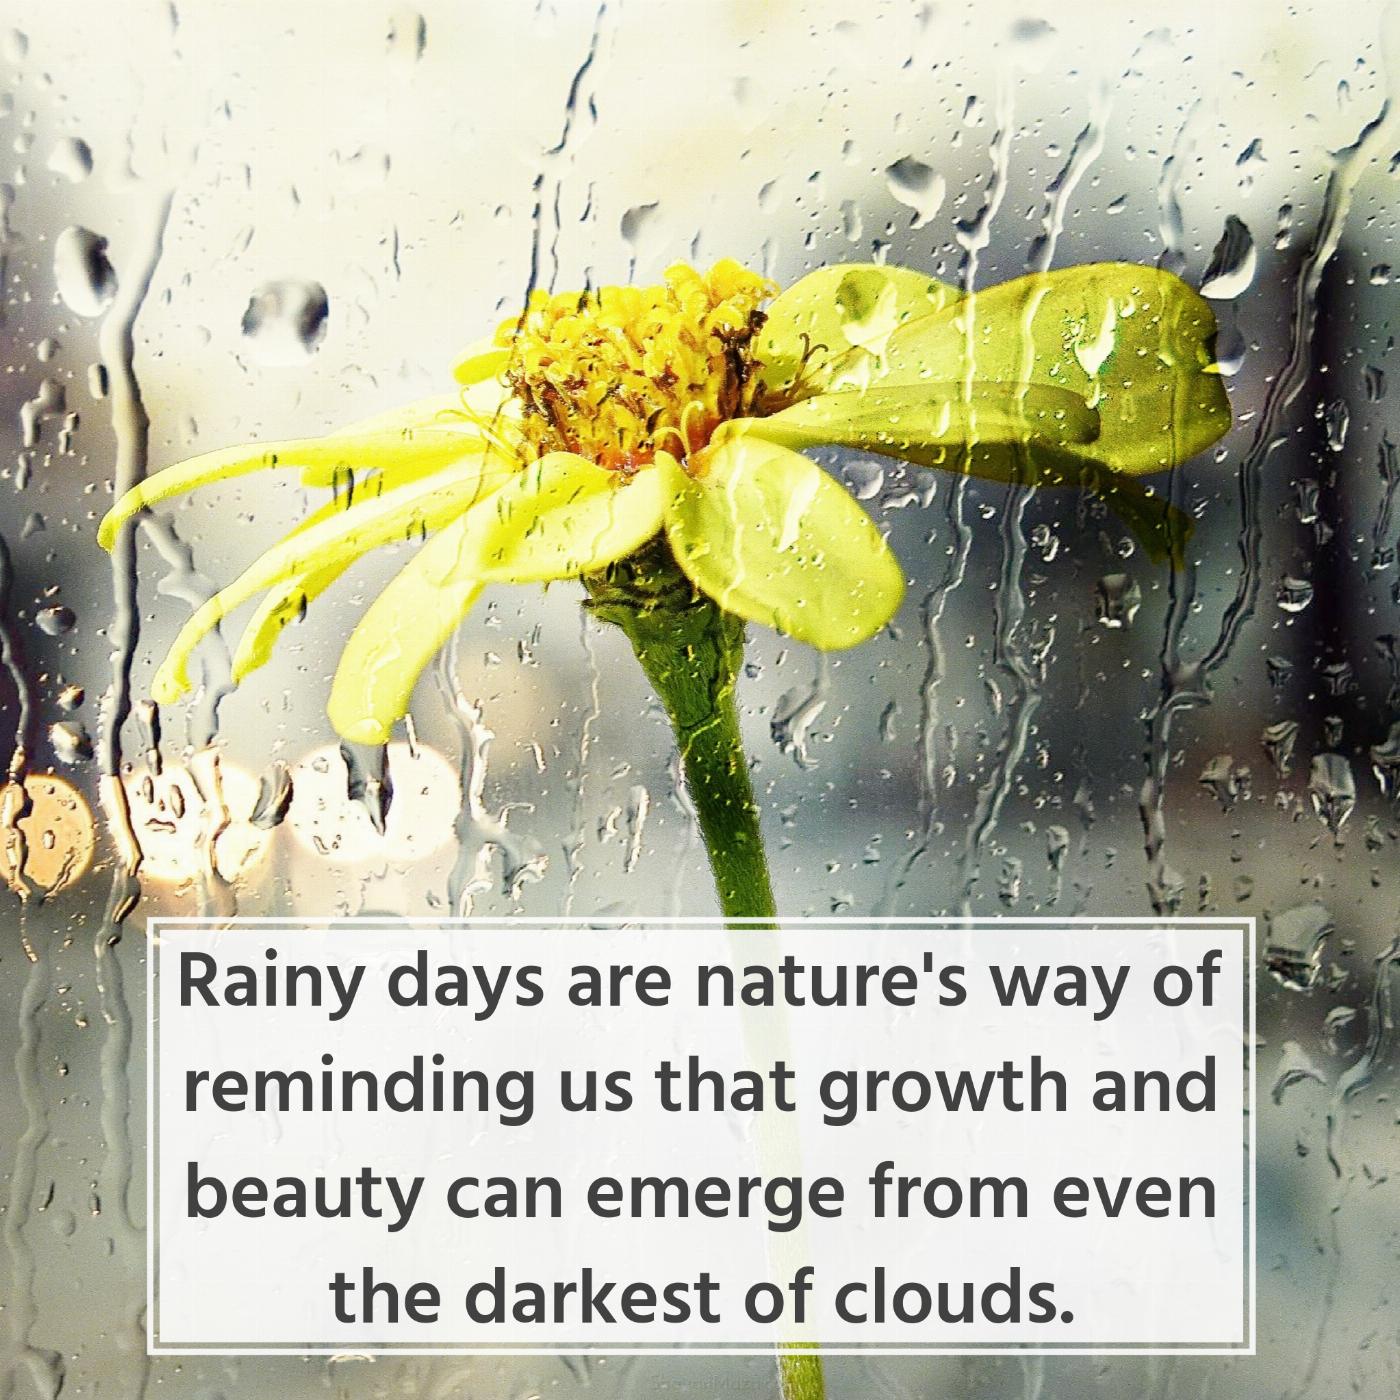 Rainy days are nature's way of reminding us that growth and beauty